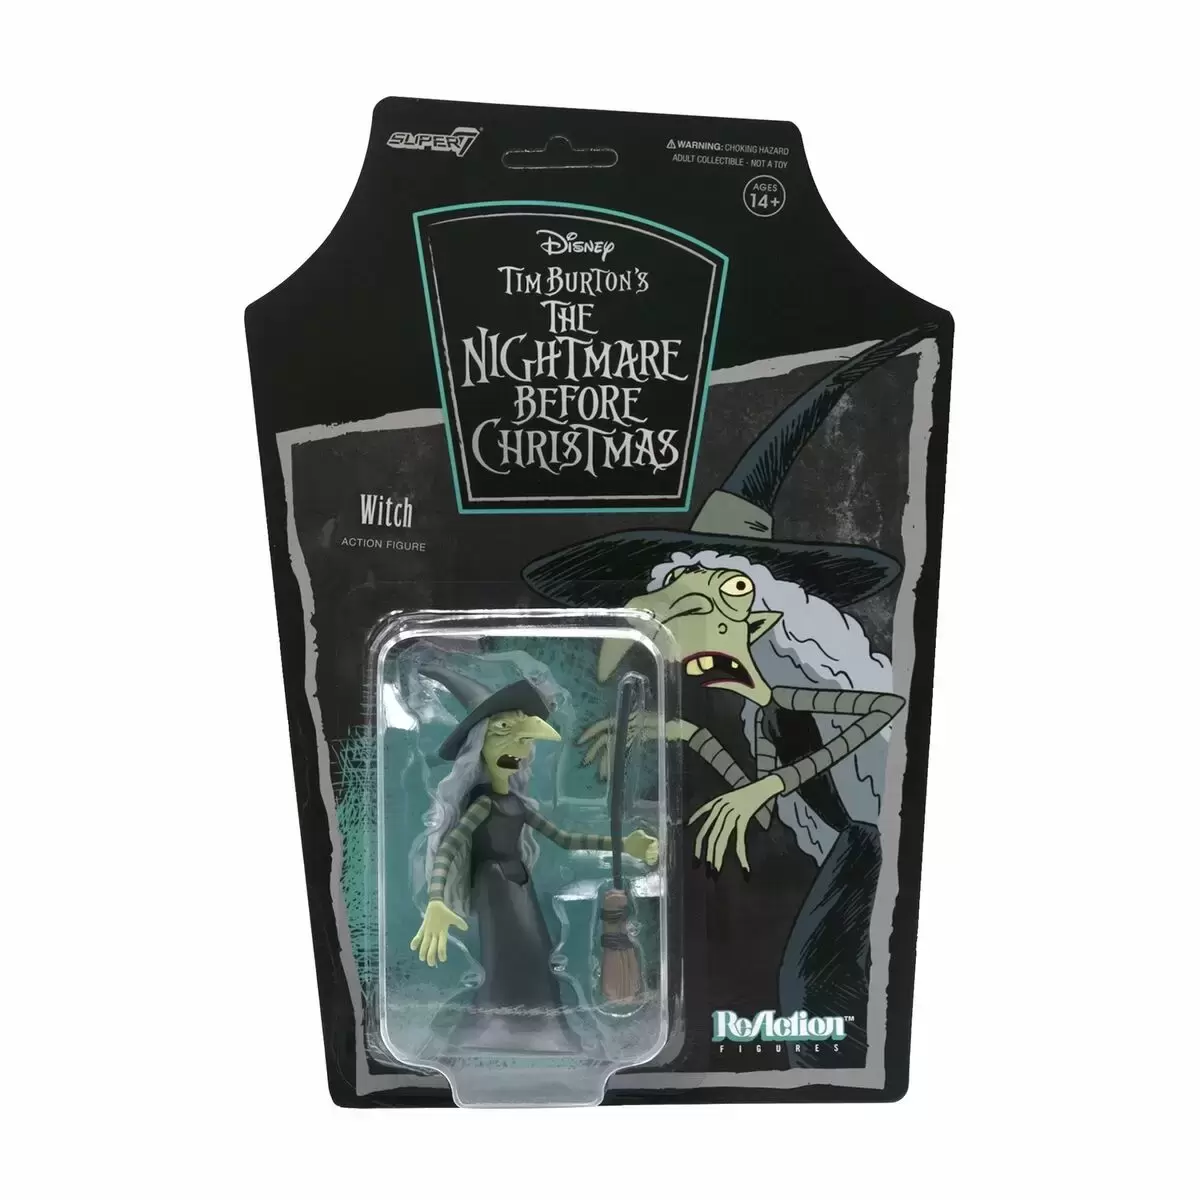 ReAction Figures - Nightmare Before Christmas - Witch